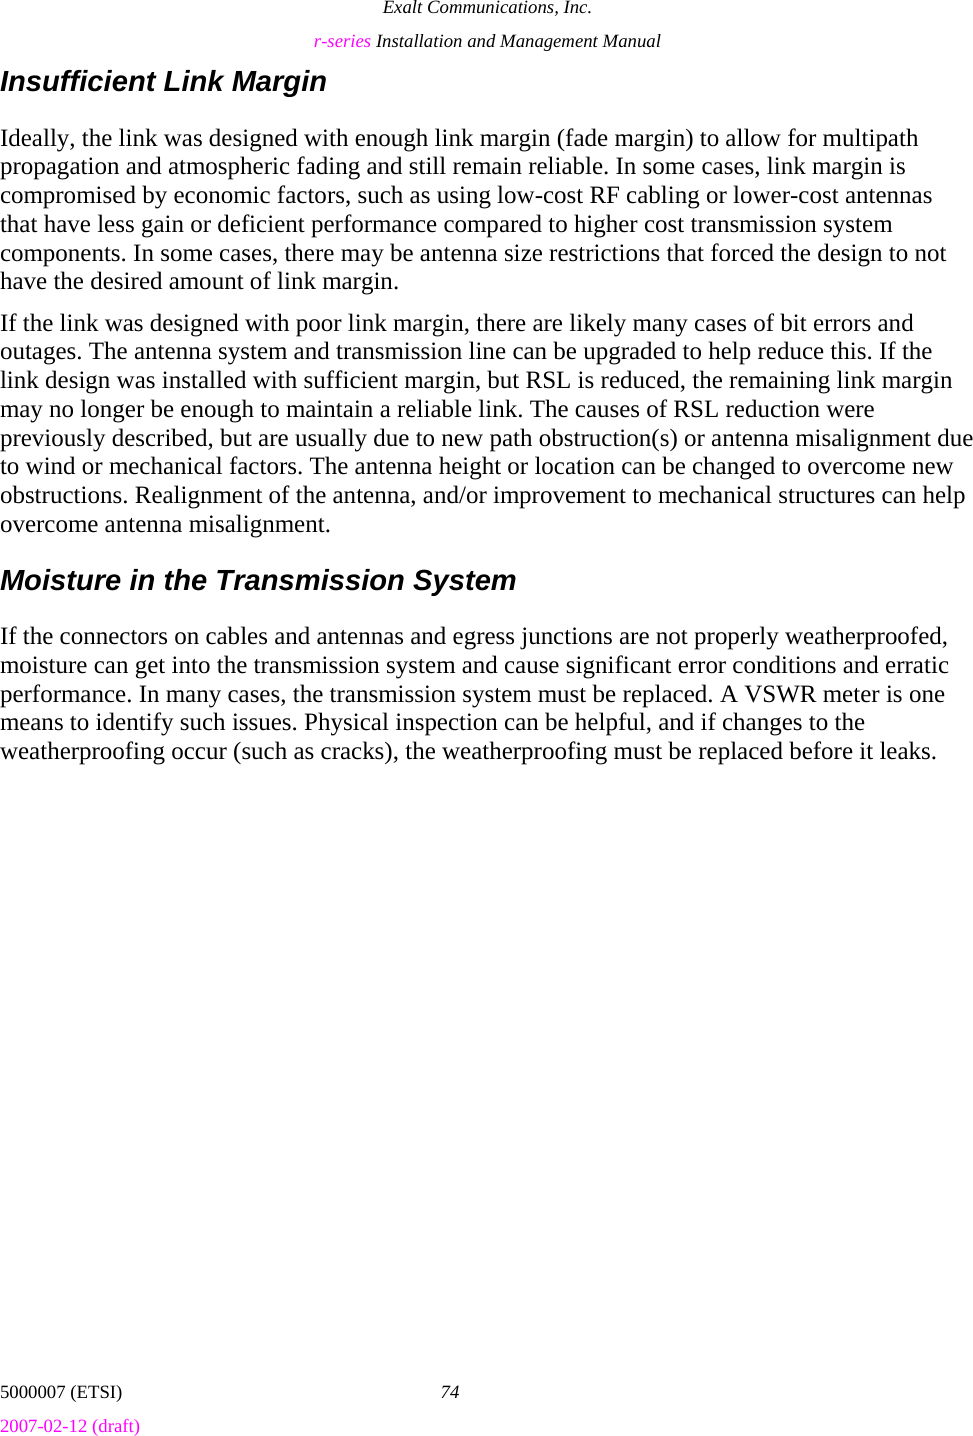 Exalt Communications, Inc. r-series Installation and Management Manual 5000007 (ETSI)  74 2007-02-12 (draft)  Insufficient Link Margin Ideally, the link was designed with enough link margin (fade margin) to allow for multipath propagation and atmospheric fading and still remain reliable. In some cases, link margin is compromised by economic factors, such as using low-cost RF cabling or lower-cost antennas that have less gain or deficient performance compared to higher cost transmission system components. In some cases, there may be antenna size restrictions that forced the design to not have the desired amount of link margin. If the link was designed with poor link margin, there are likely many cases of bit errors and outages. The antenna system and transmission line can be upgraded to help reduce this. If the link design was installed with sufficient margin, but RSL is reduced, the remaining link margin may no longer be enough to maintain a reliable link. The causes of RSL reduction were previously described, but are usually due to new path obstruction(s) or antenna misalignment due to wind or mechanical factors. The antenna height or location can be changed to overcome new obstructions. Realignment of the antenna, and/or improvement to mechanical structures can help overcome antenna misalignment. Moisture in the Transmission System If the connectors on cables and antennas and egress junctions are not properly weatherproofed, moisture can get into the transmission system and cause significant error conditions and erratic performance. In many cases, the transmission system must be replaced. A VSWR meter is one means to identify such issues. Physical inspection can be helpful, and if changes to the weatherproofing occur (such as cracks), the weatherproofing must be replaced before it leaks. 